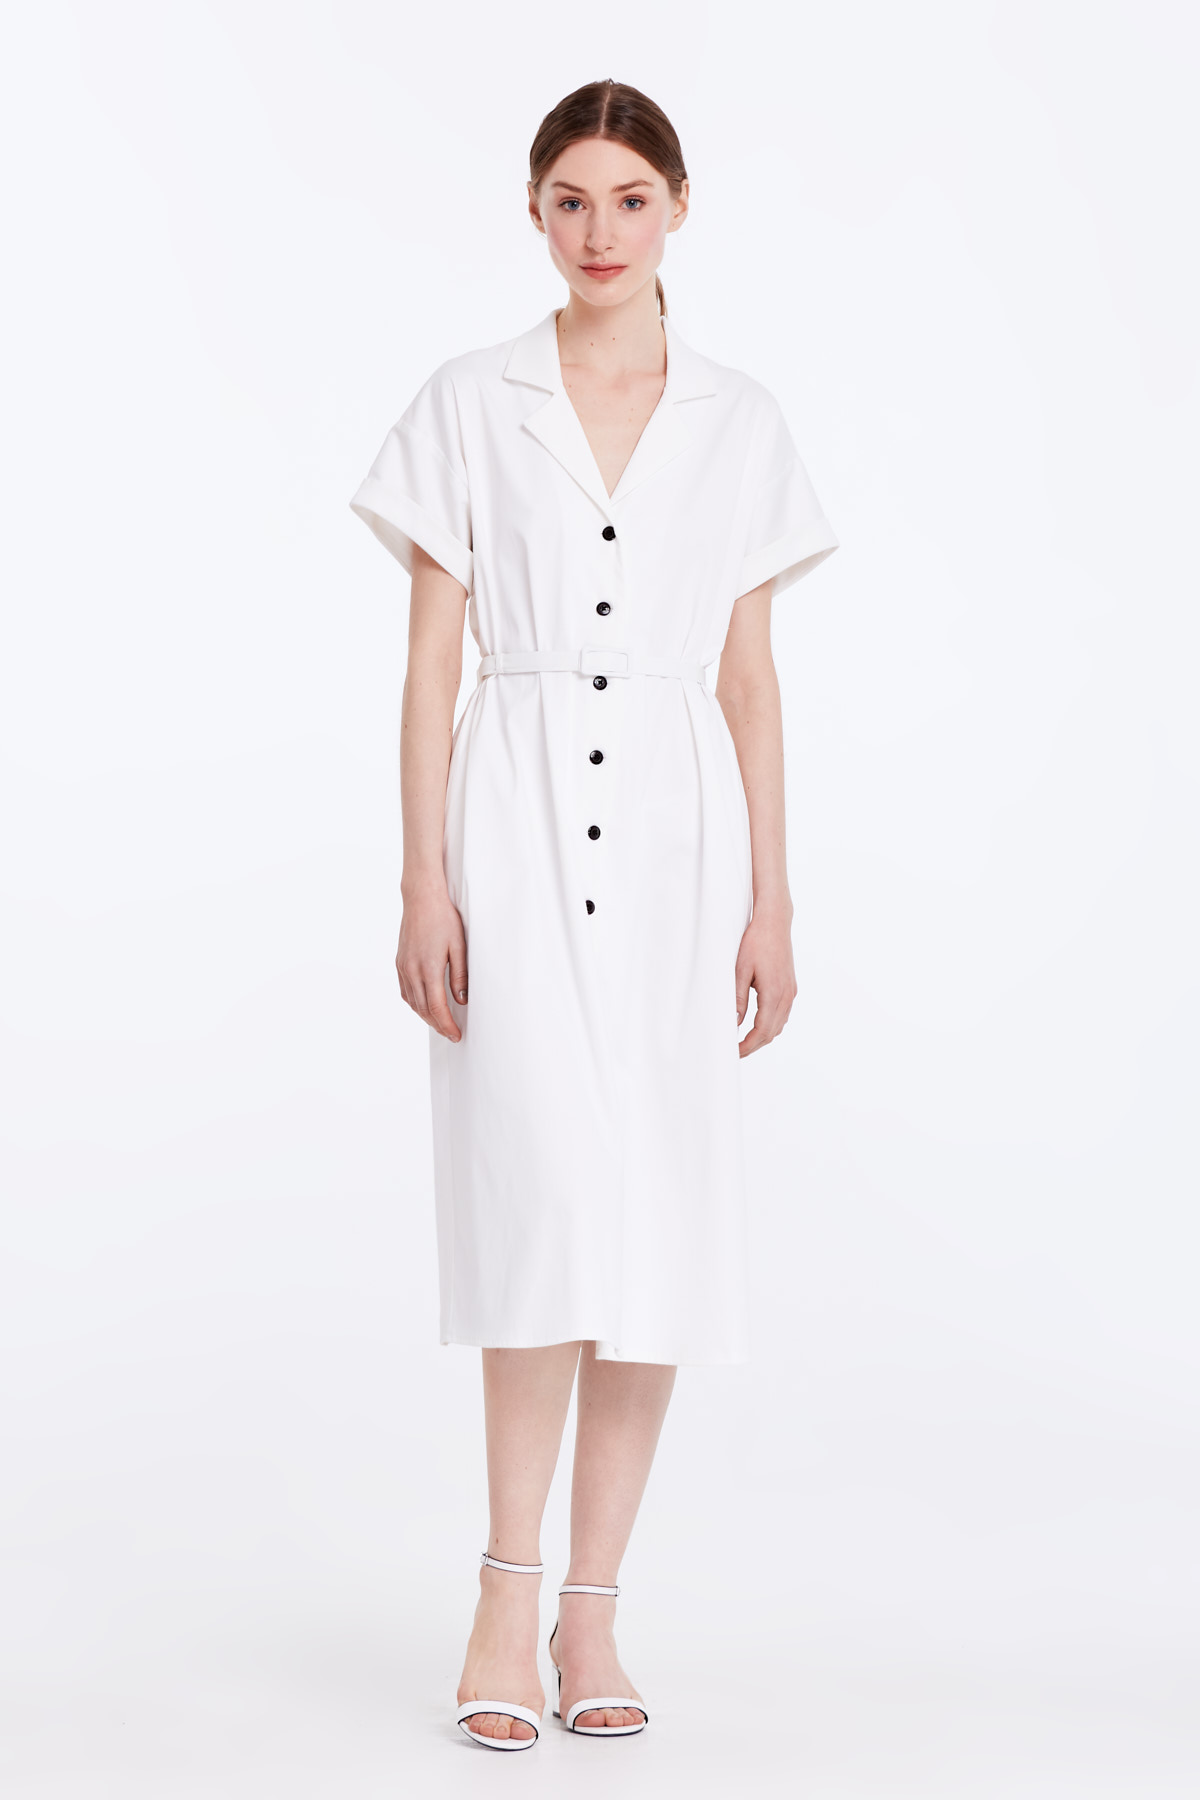 White dress with buttons and a belt , photo 2